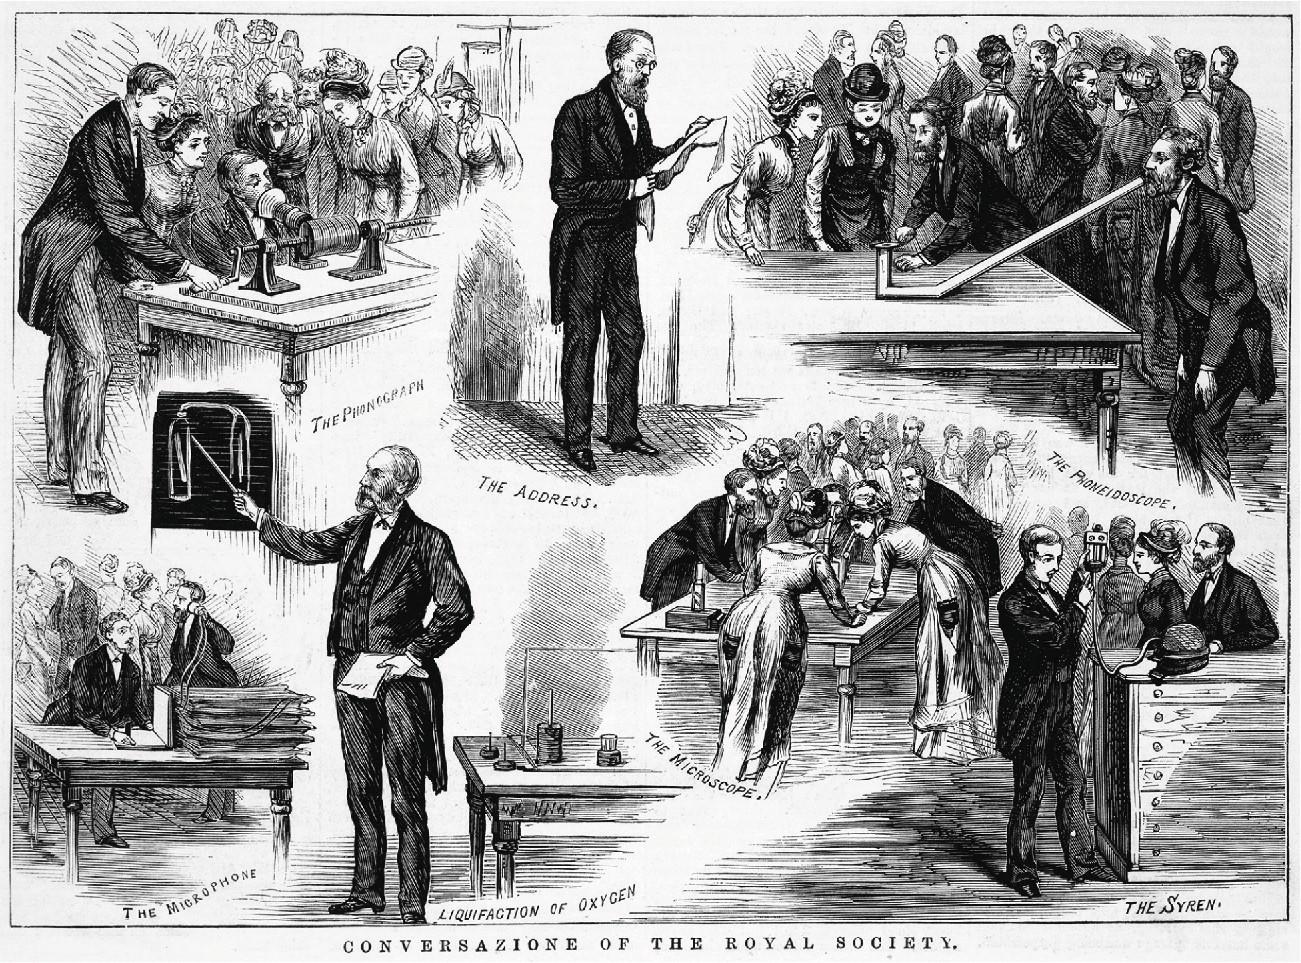 The black and white image includes seven different images shown in a collage. In the top left is a table with an early phonograph sitting on top. A man on the left in a suit and striped pants is turning a crank that leads to a long projection going through a barrel and leading to a tube. A man sitting at the table is talking into that tube. Behind him two ladies in dresses and a man in a suit with a large moustache are watching. People behind them are standing and watching what is happening. The image is labeled “the Phonograph.” In the middle top of the drawing a man in a dark suit, beard, and small round glasses is standing, reading from a long flowy piece of paper. The image is labeled “the Address.” In the top right a large table is shown with an “L” shaped item with a long projection coming out of the bottom of the “L.” A man with a beard dressed in a black suit stands at the end of that projection and talks into it. Two women in dresses and large hats and a man with a beard and suit stand at the top of the “L” item listening. In the background behind them twelve men and women in dresses, suits, and hats stand around talking to each other. The drawing is labeled “The Phoneidoscope.” In the bottom right, a tall cabinet with drawers is shown. At the left stands a man in a dark suit holding a rectangular shaped item with lines and circle on it. It has a tube attached to the bottom that runs to an oval shaped object sitting on the cabinet. A man with a beard in a dark suit and a woman in a dress and a large feathery hat stand behind the cabinet looking at the man. Two people are shown standing in the background. The image is labeled “The Syren.” In the middle bottom of the drawing a large rectangular table is shown with three primitive microscopes. Three women in long dresses and large feathery hats lean over the table, observing what is happening. Two men in dark suits lean over and table and one man sits at the far end looking into a microscope. Many people are in the background talking to each other. Under the drawing are the words “The Microscope.” To the left of that scene a man is drawn with a moustache and beard, wearing a dark suit. He holds a stick in his right hand that is pointing to a drawing of two glass bottle connected with a tube at the top. He is holding a paper in his left hand. Behind him is a table with various circular items on it and under the table are the words “Liquifaction of Oxygen.” The drawing in the bottom left shows a man in a black suit sitting at a table holding an open book. The table has five stacked flat rectangular objects on it with two wires running from their top to a circular container another man holds to his left ear. He is standing next to the seated man. Behind them five men and women stand around and talk with each other. The words “The Microphone” are written under the table. The words “Conversazione of the Royal Society.” run along the bottom of the drawing.